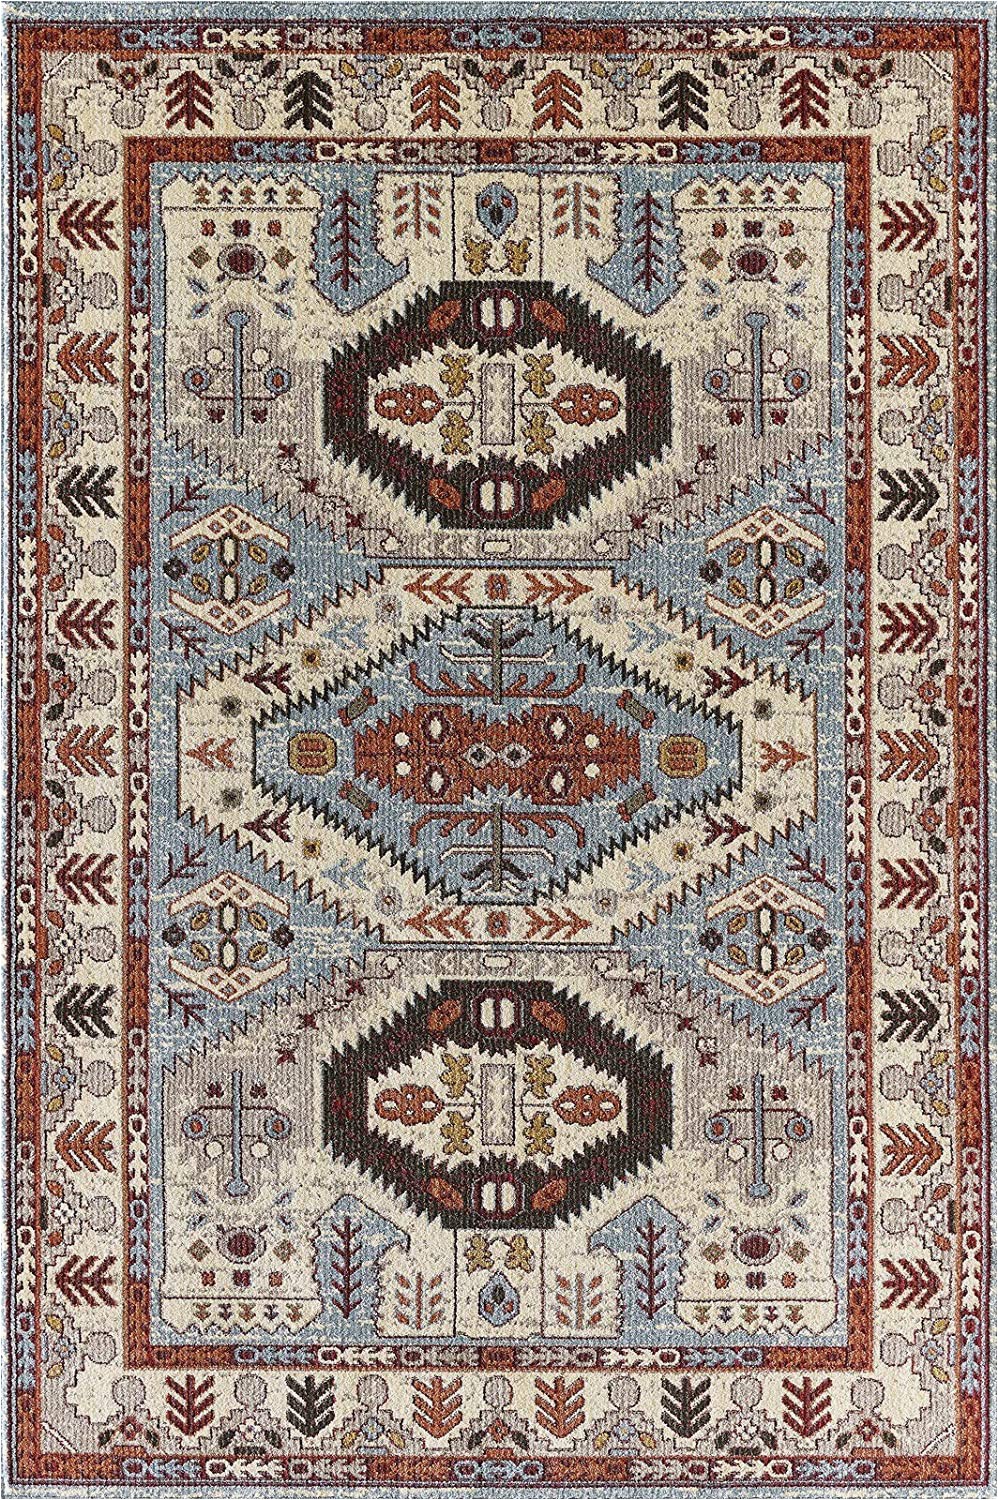 Bed Bath and Beyond area Rugs 6×9 Glory Rugs area Rug Tribal Marisela Vintage south West Carpet Traditional Texture for Bedroom Living Dining Room 7316 Gabbeh Collection 8×10